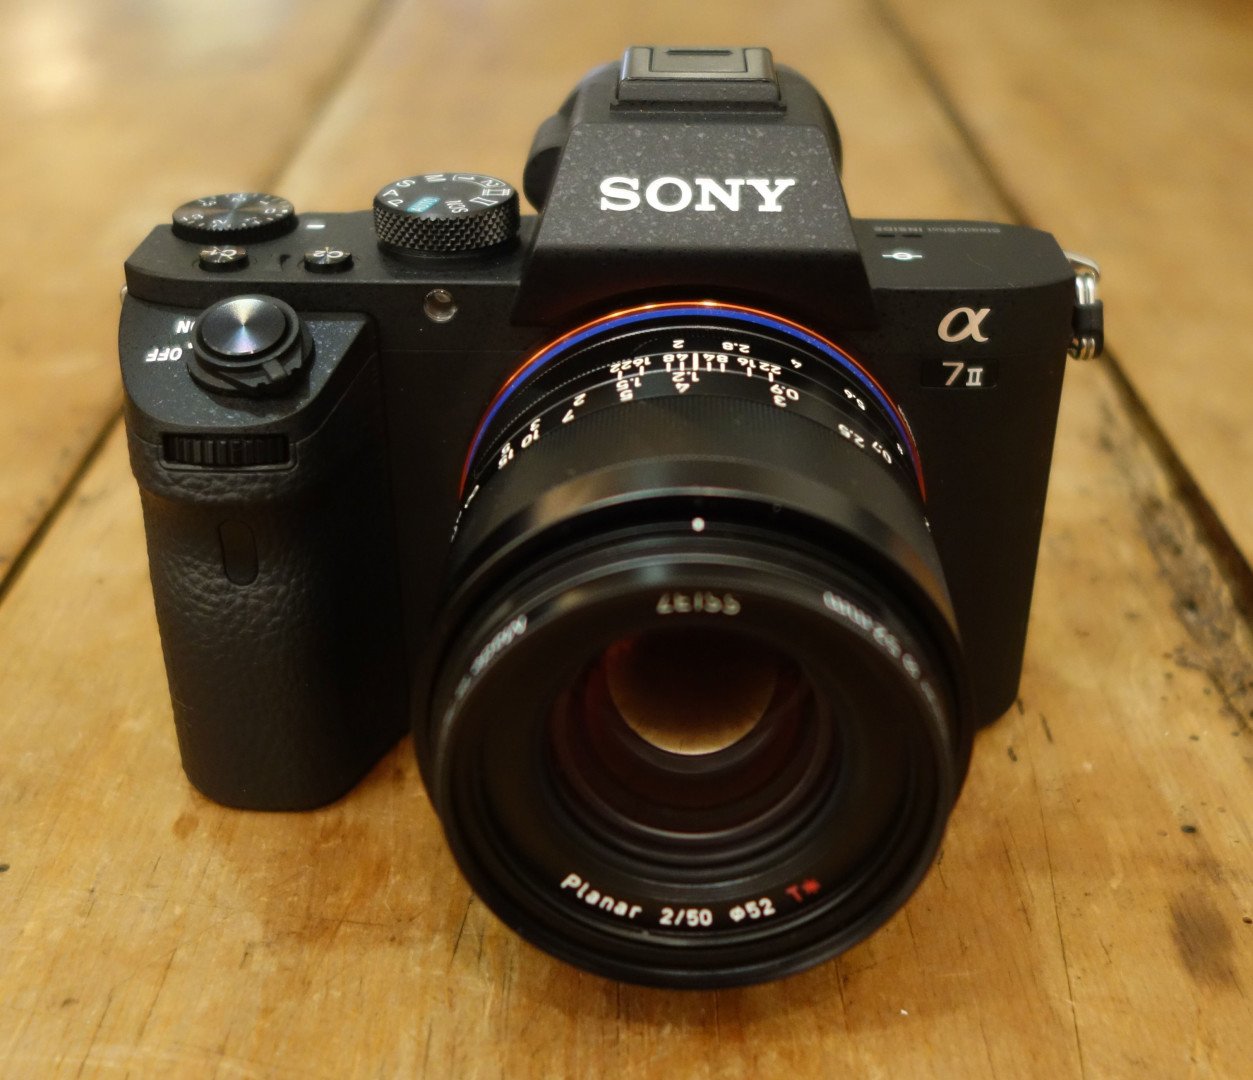 Sony A7 II featured